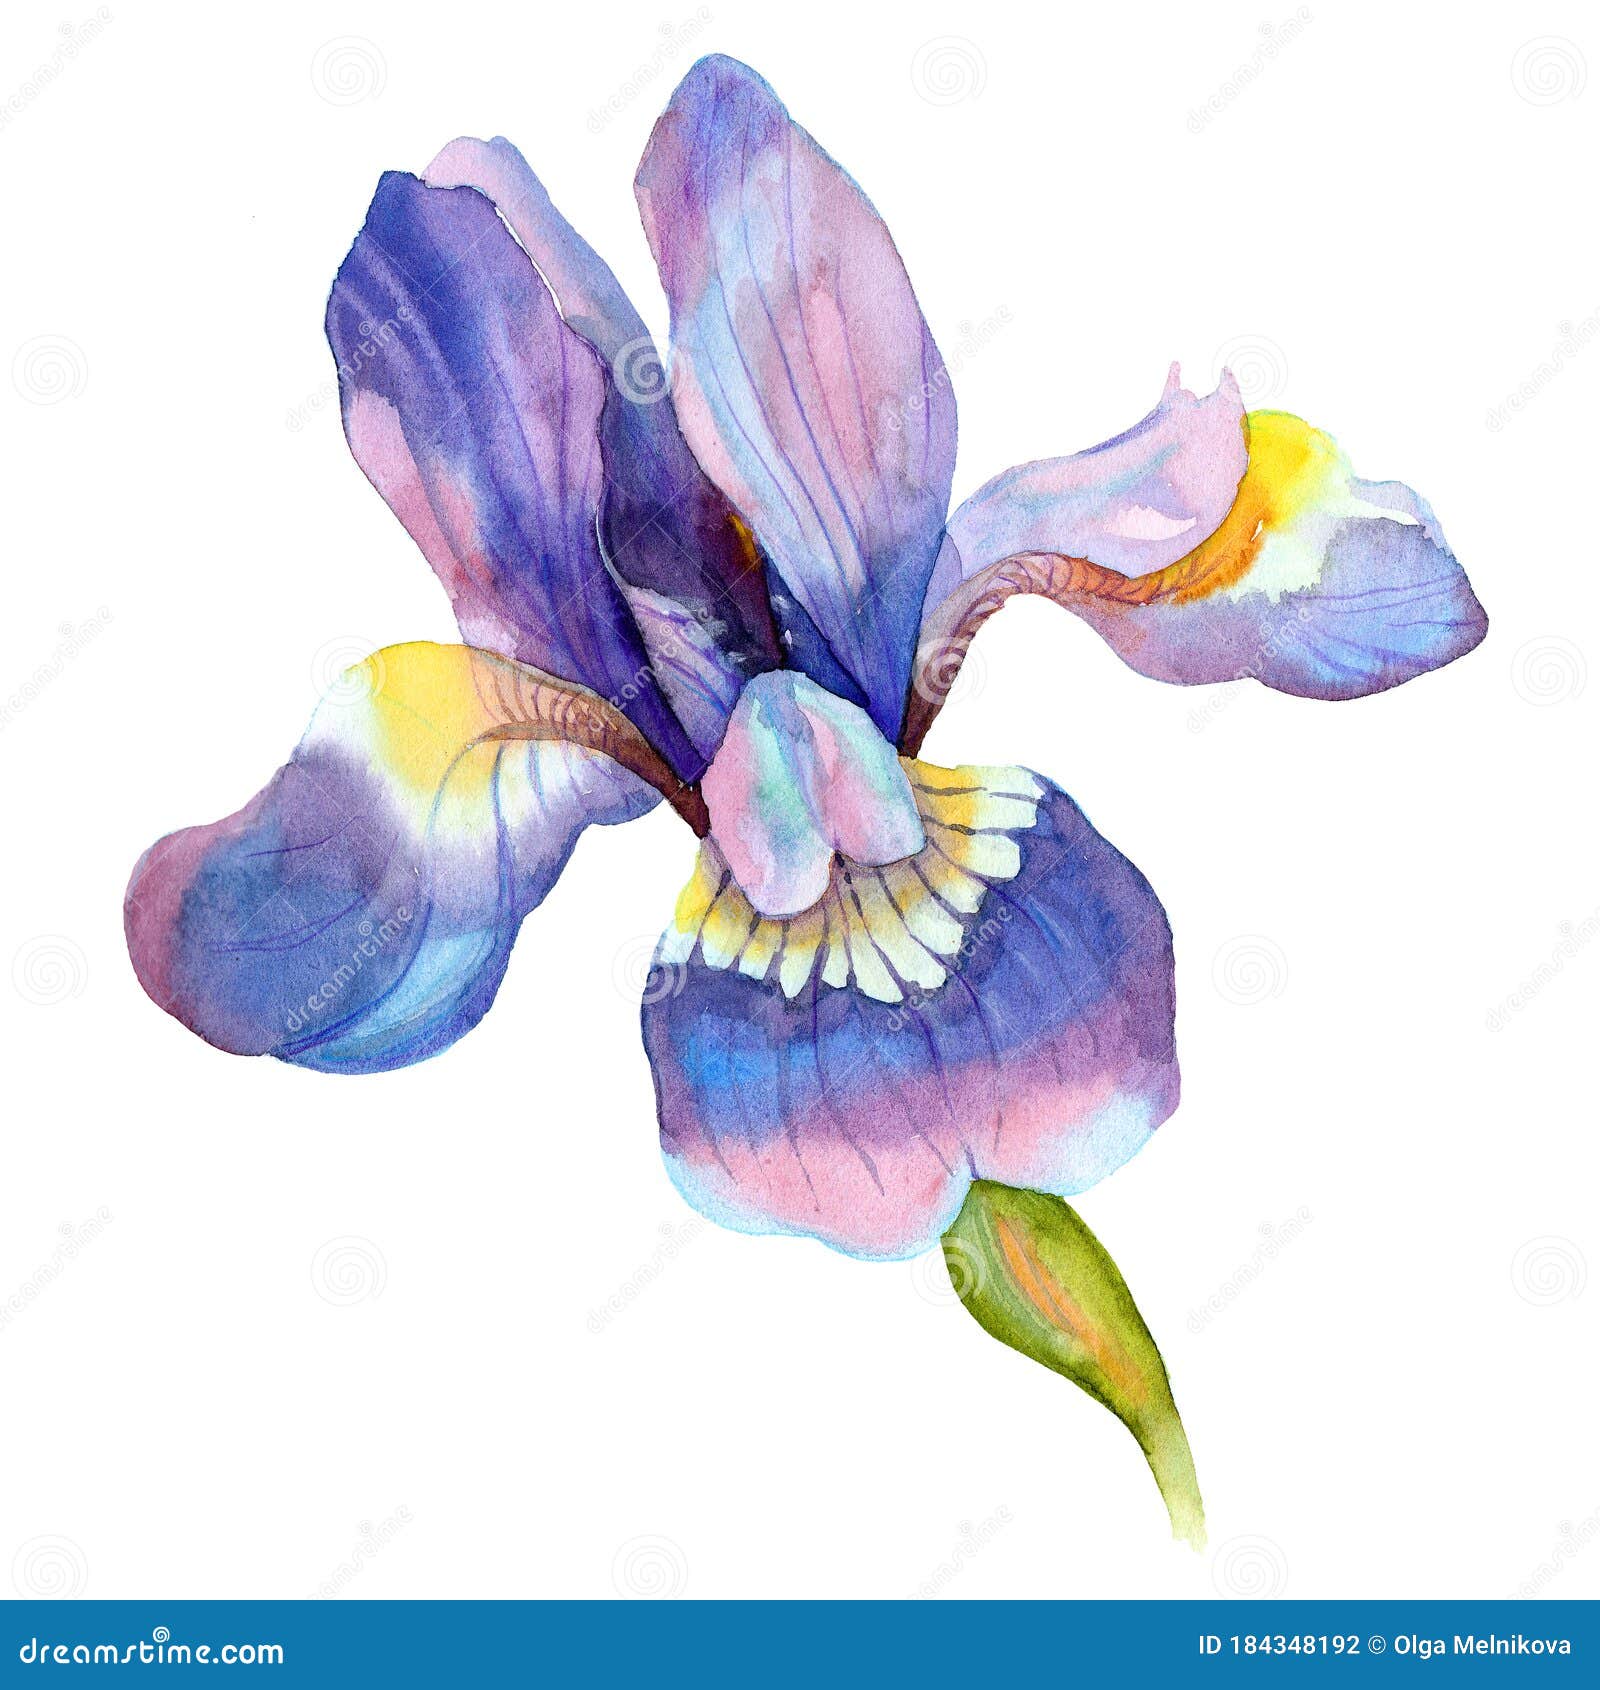 Realistic Illustration of an Iris Flower. Botanical Watercolor ...